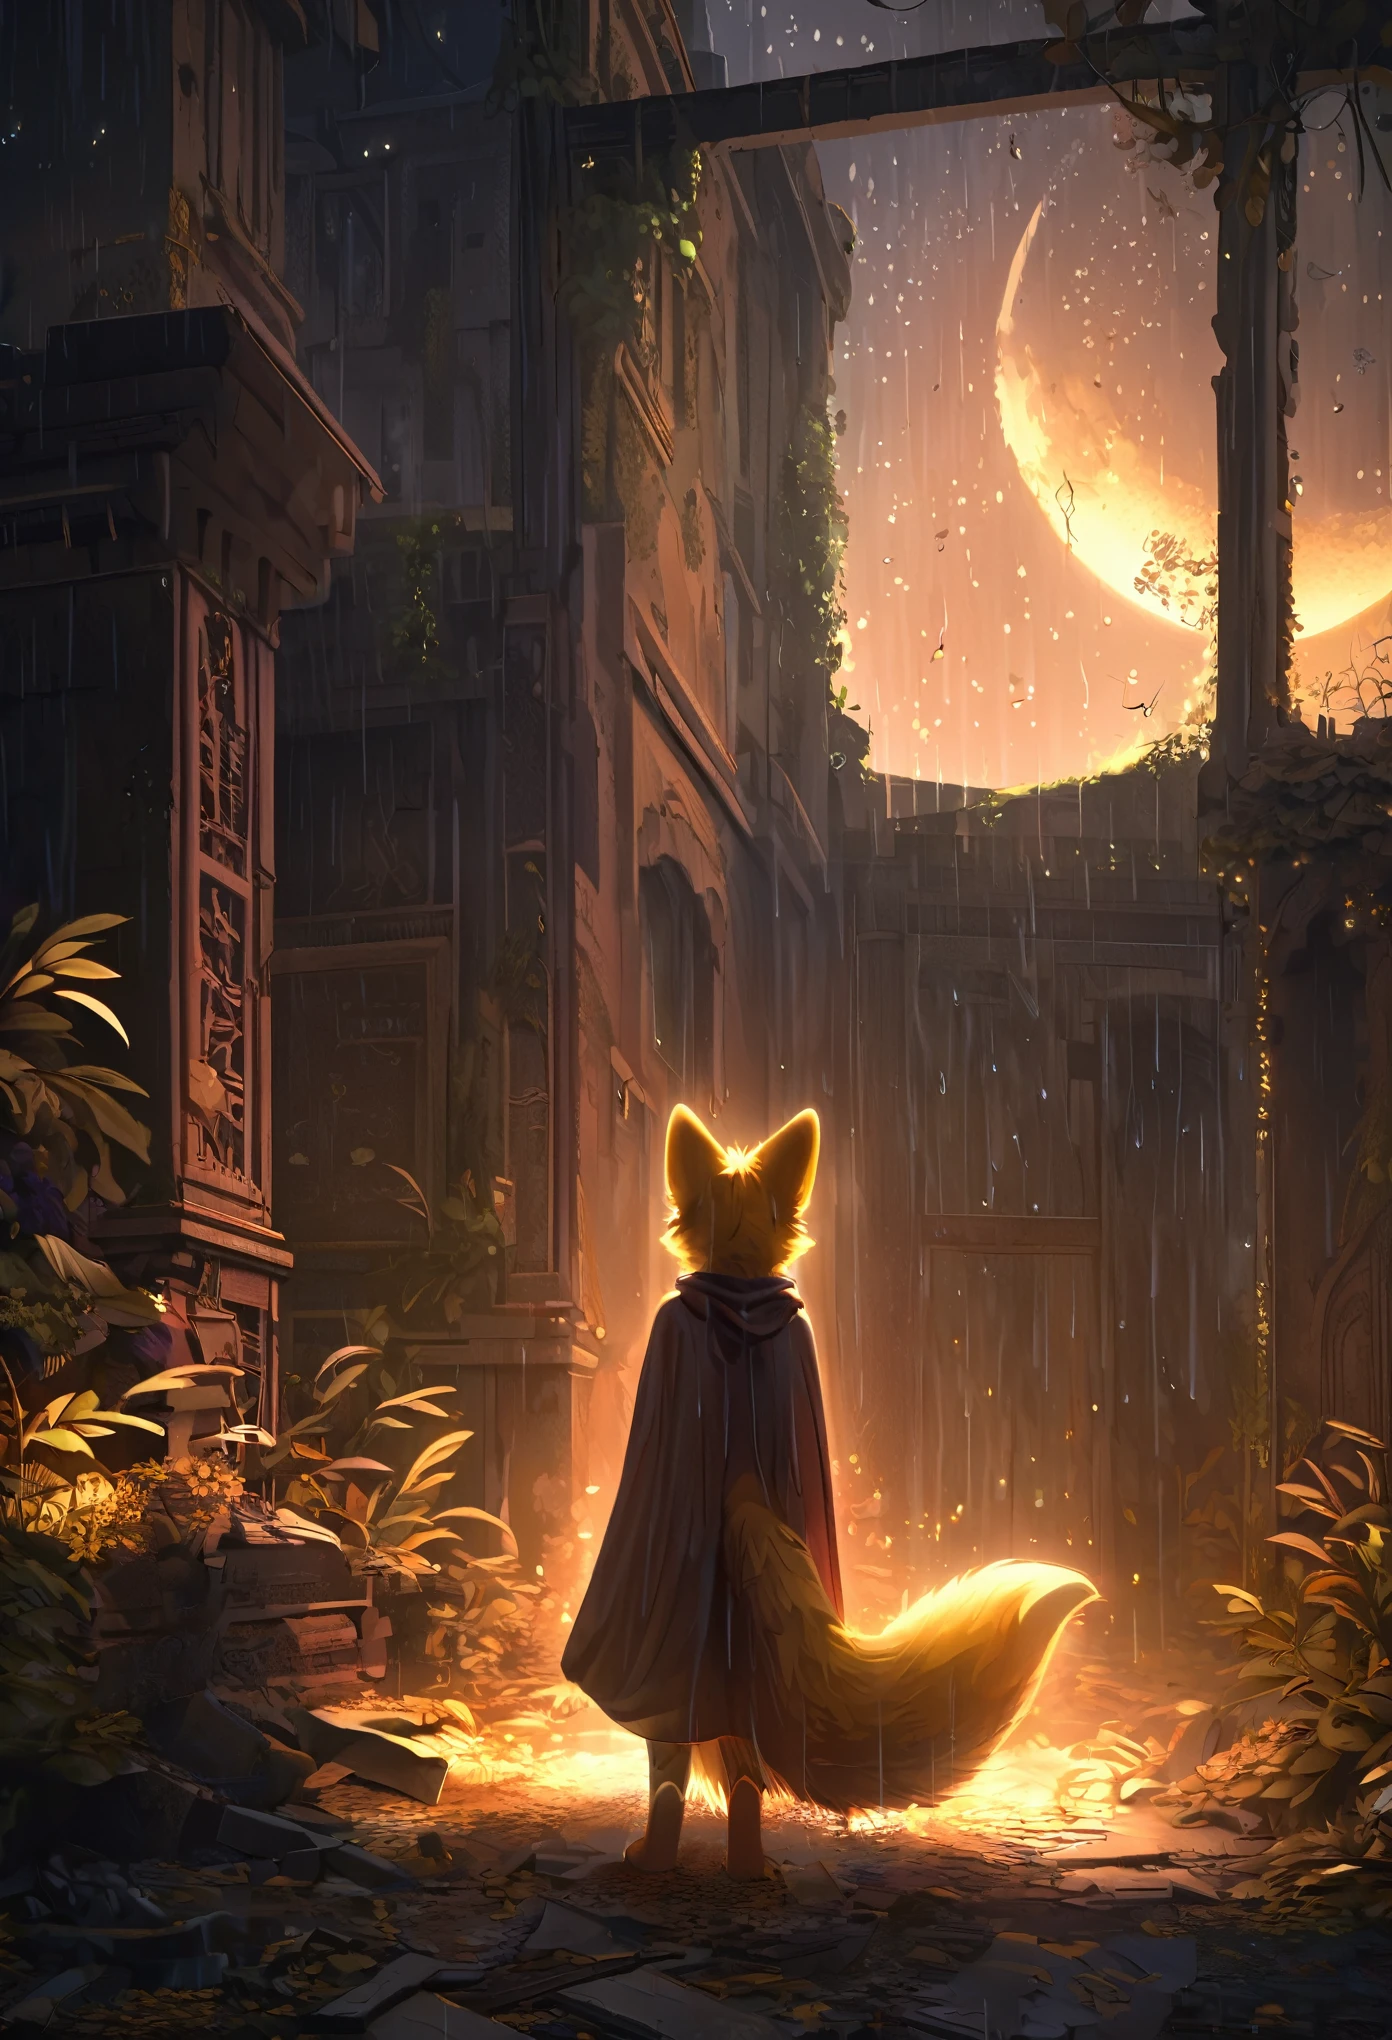 masterpiece, best quality, 4K，Ultra-delicate, Shota the fox, solo, Skin fur, Golden fur, Golden yellow face fur, Red eyes, Brown elements on fur, Brown coat brown hood up, Beautiful lights and shadows, Ambient light, Ultra-fine fur, natural  lighting, Fluffy tail, Dilapidated building, Plant elements in ruins, Night, starry sky, Shiny hair(moon full, meteors)Star cloud, Warm light source, Rained, wet clothes(overcast sky, Standing downpour)Extra-long sleeves, Purple and orange, Complicated details, Volumetric lighting, Dynamic configuration, luminous lighting, Atmospheric lighting, dream magical, magic, Glowing light,